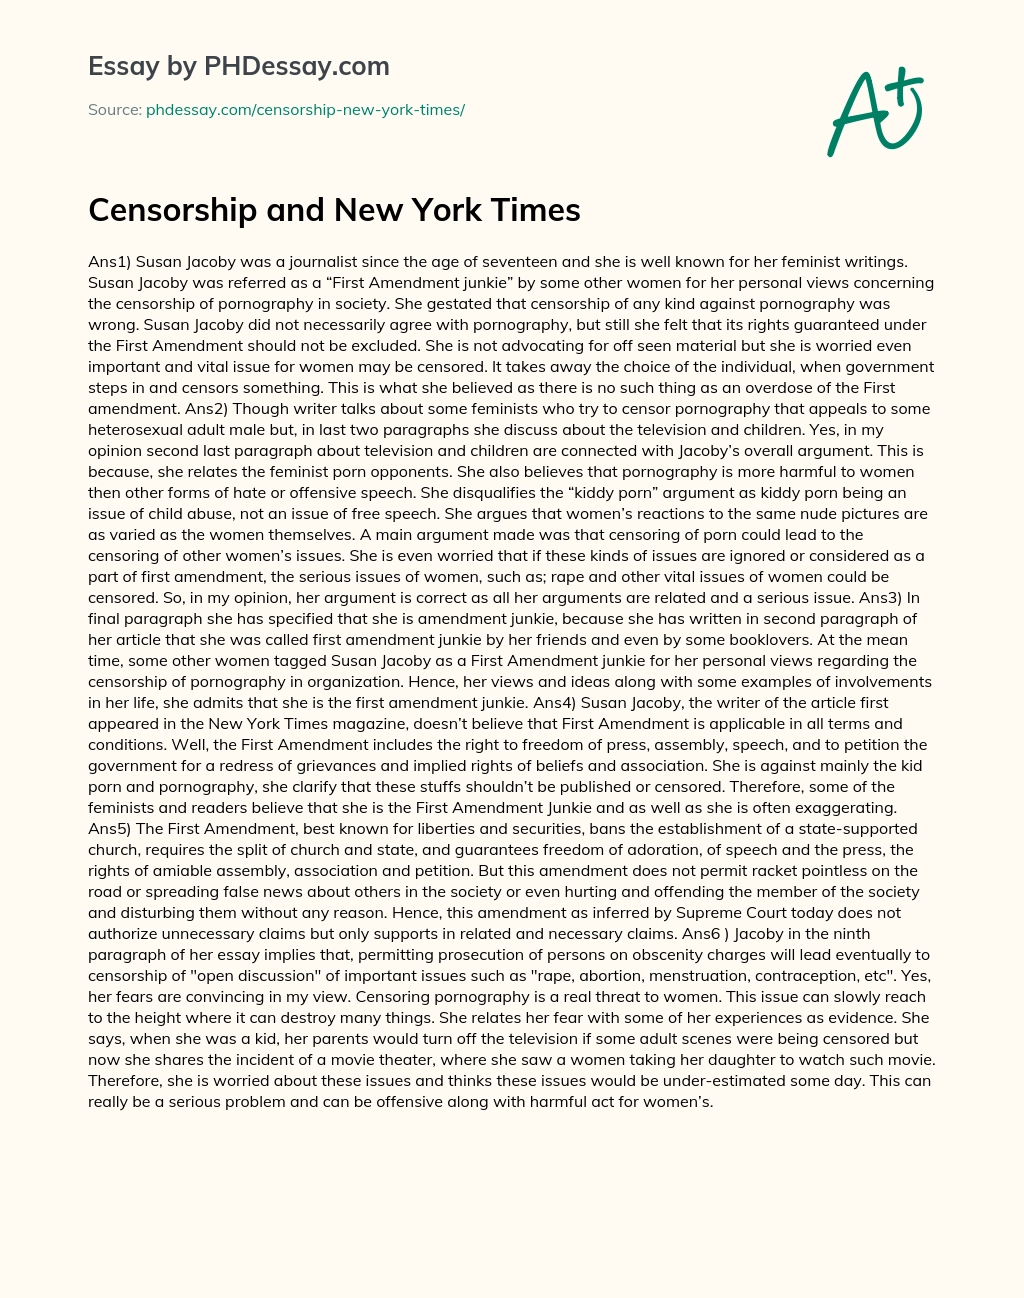 Censorship and New York Times essay